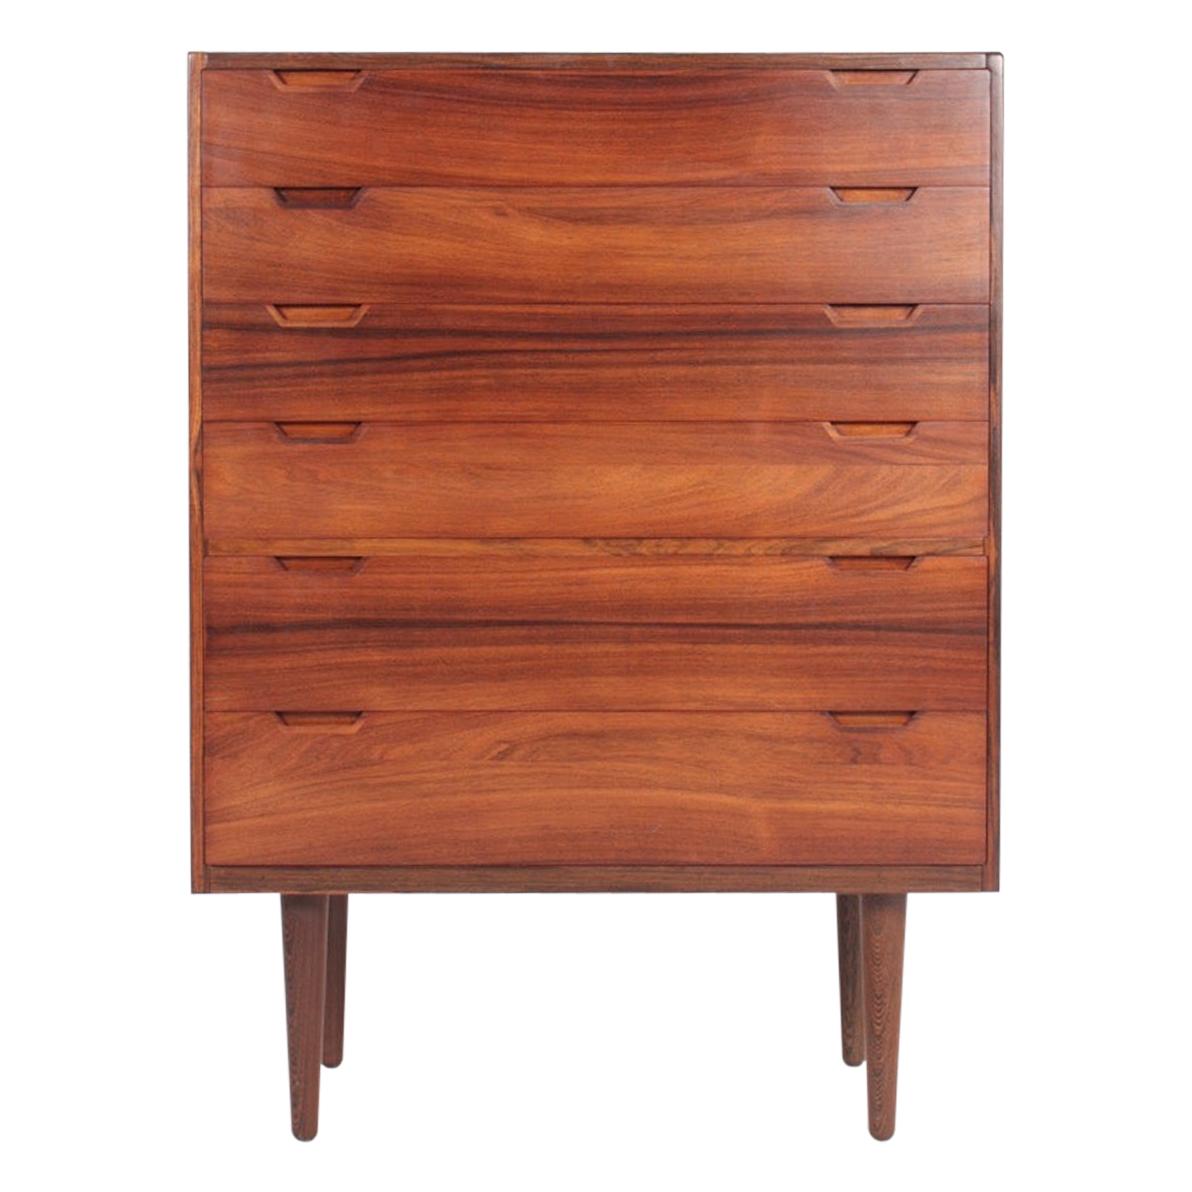 Midcentury Commode in Rosewood by Svend Langkilde, 1960s Danish Design